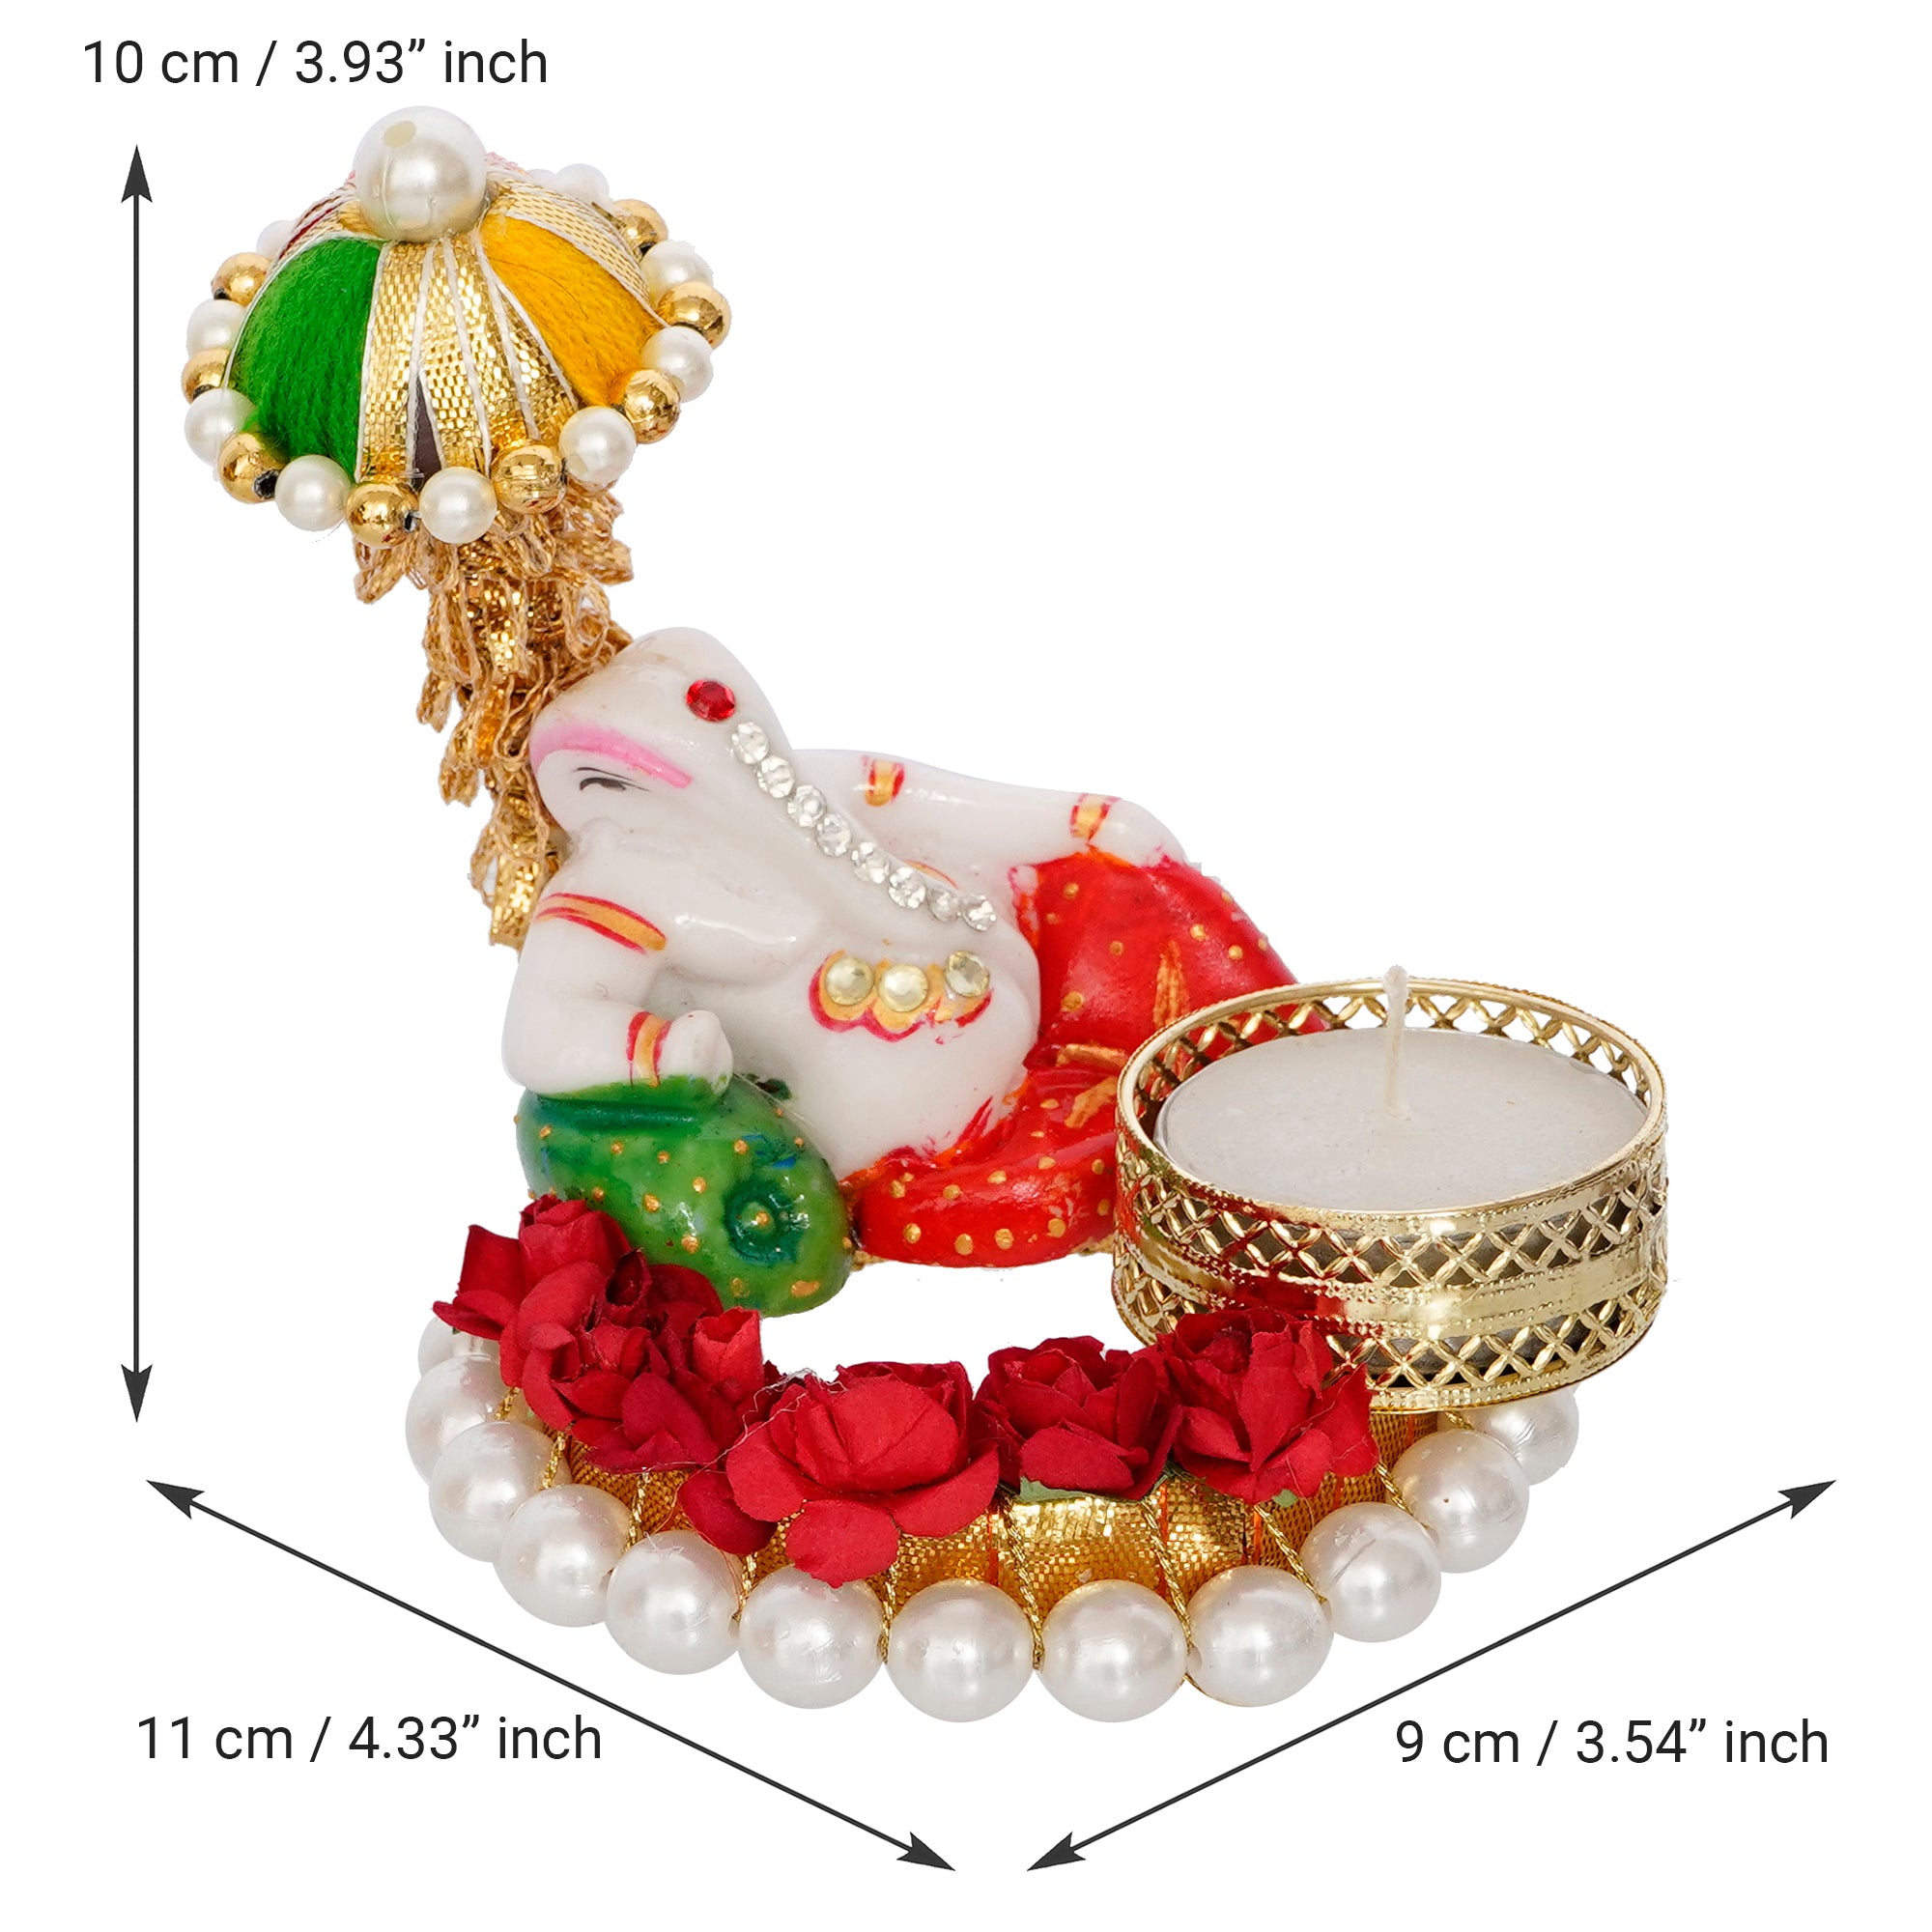 Lord Ganesha Idol on Decorative Handcrafted Floral Plate for Home and Car 3